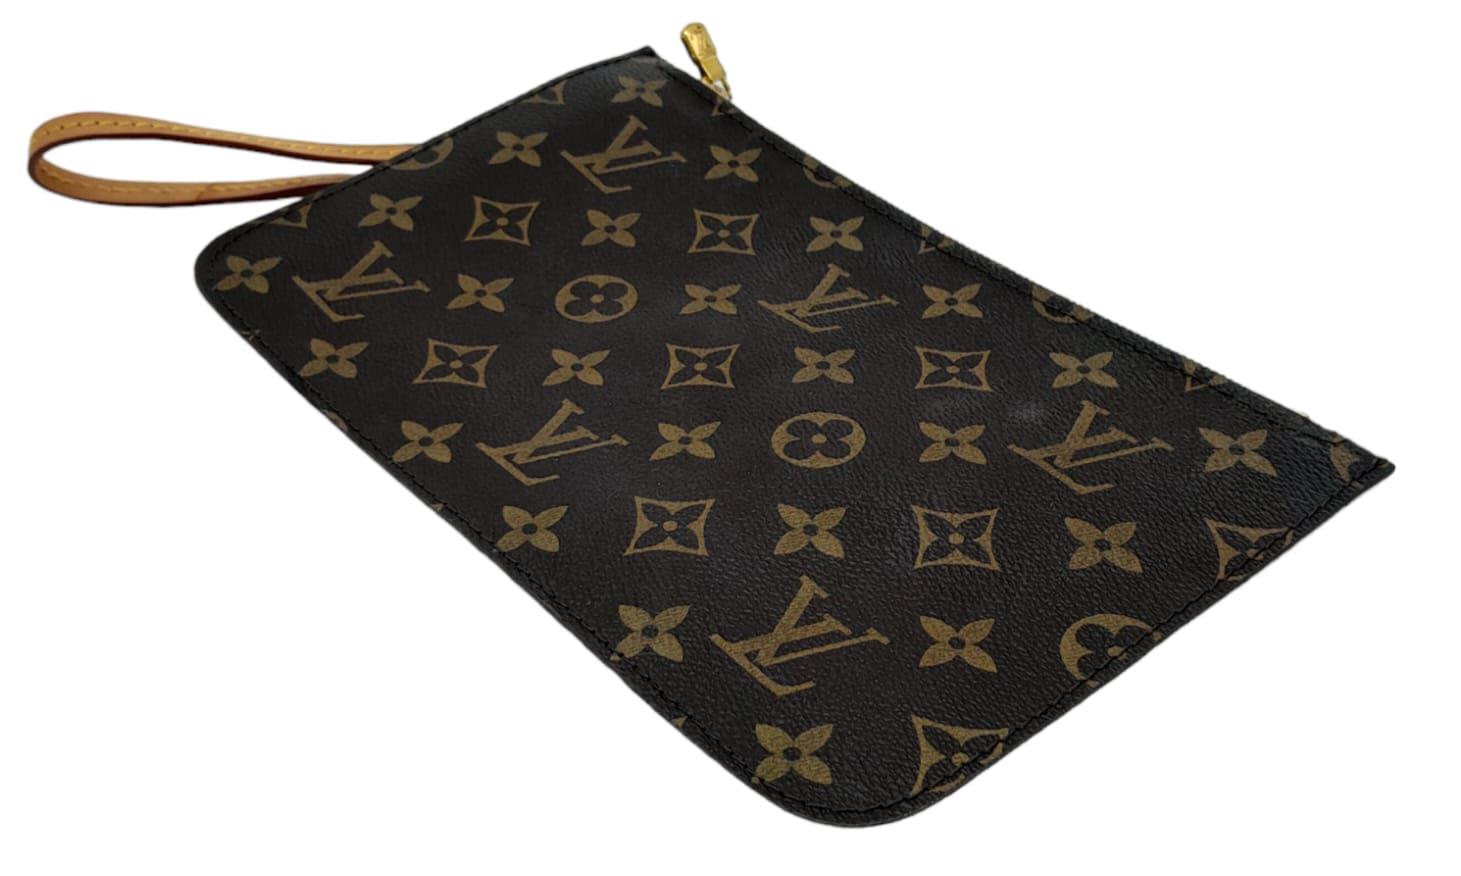 Quality Louis Vuitton Pouch in classic monogram design. Features gold tone hardware, striped - Image 3 of 8